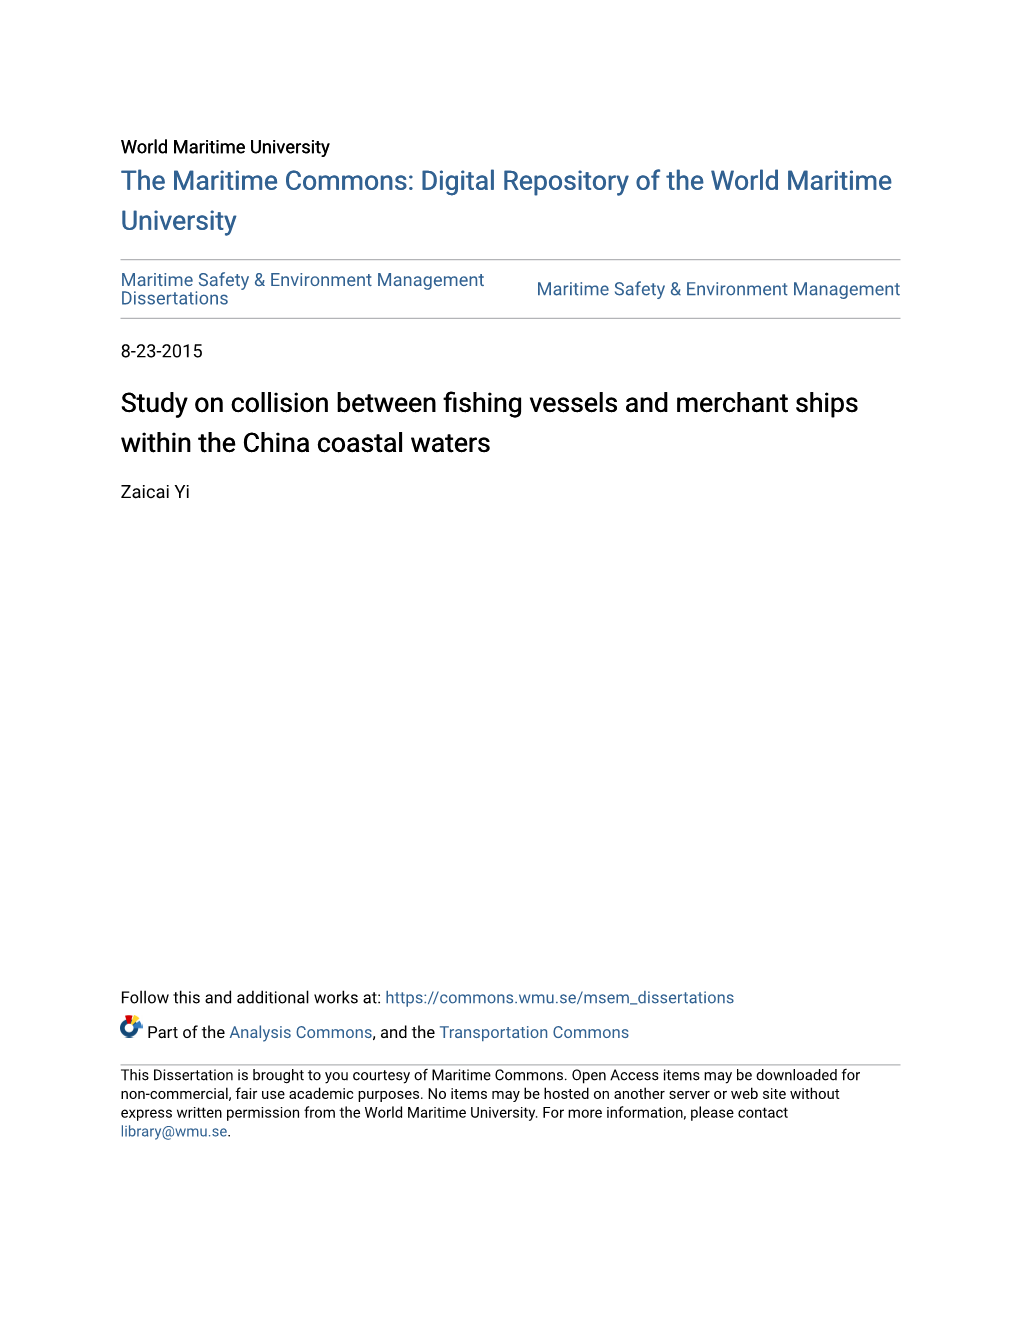 Study on Collision Between Fishing Vessels and Merchant Ships Within the China Coastal Waters